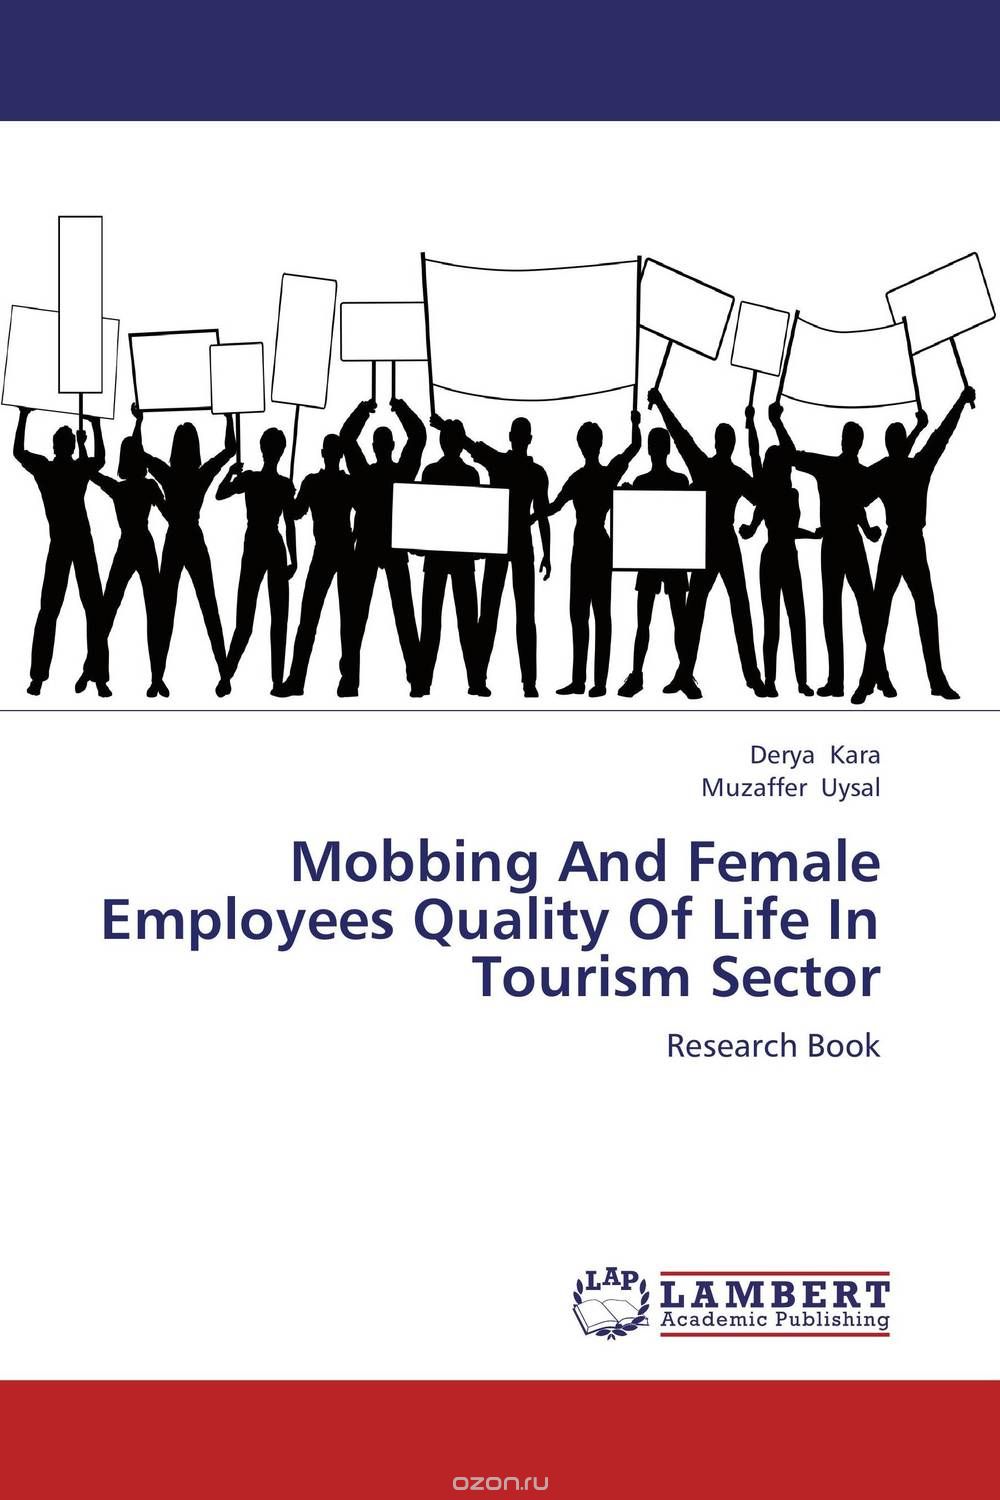 Mobbing And Female Employees Quality Of Life In Tourism Sector